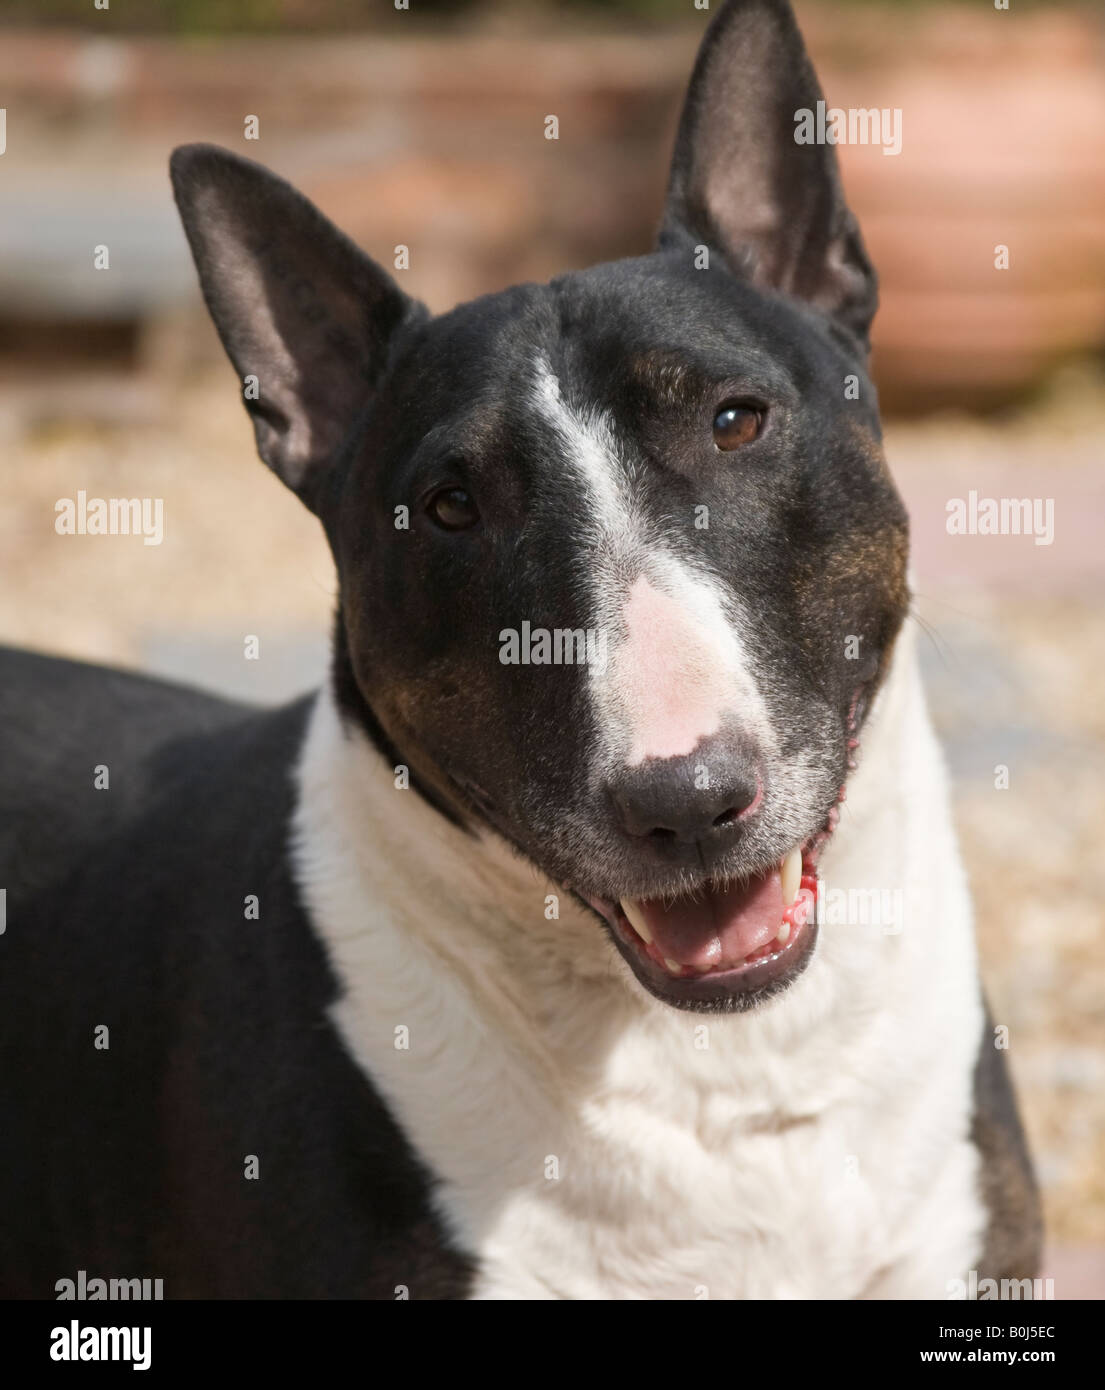 Portrait photograph of a black and white English Bull Terrier ^dog in a garden with his mouth slightly open. Stock Photo